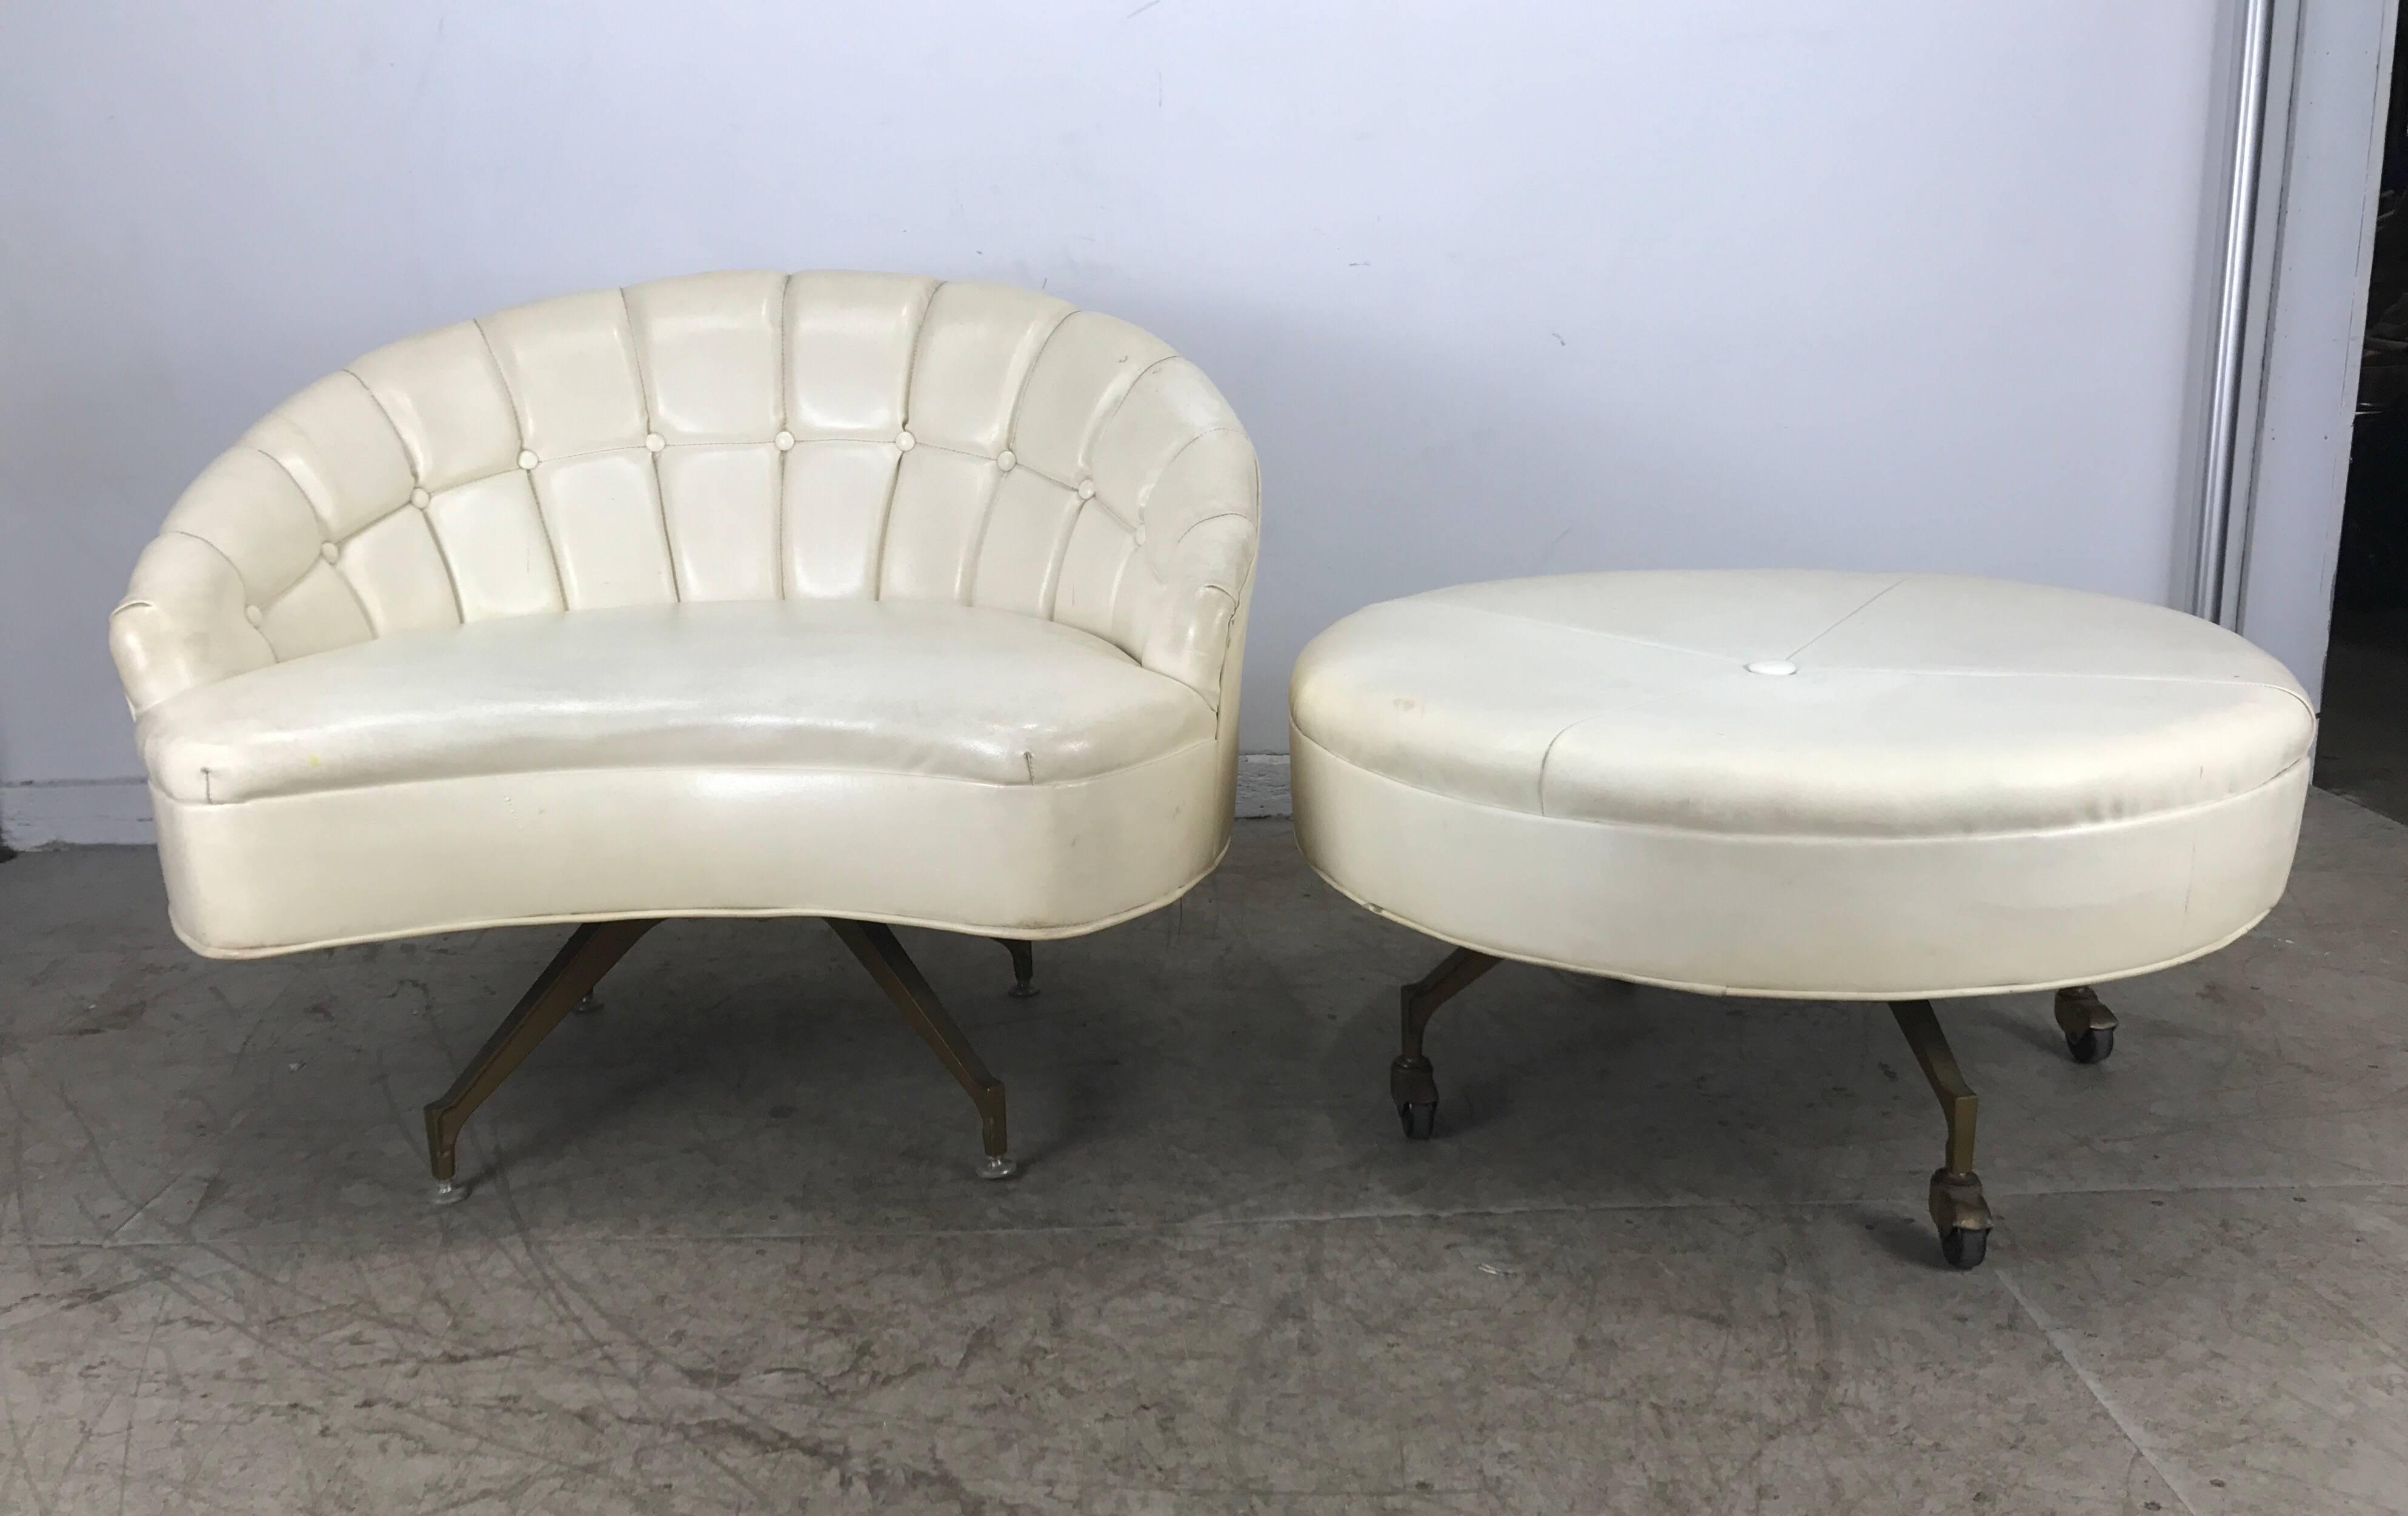 Unusual pop modernist white Naugahyde button tufted barrel lounge chair and round ottoman 32 inches in diameter, on castors, super sexy design, cast aluminium bases, Hand delivery available to New York City or anywhere enroute from Buffalo New York.